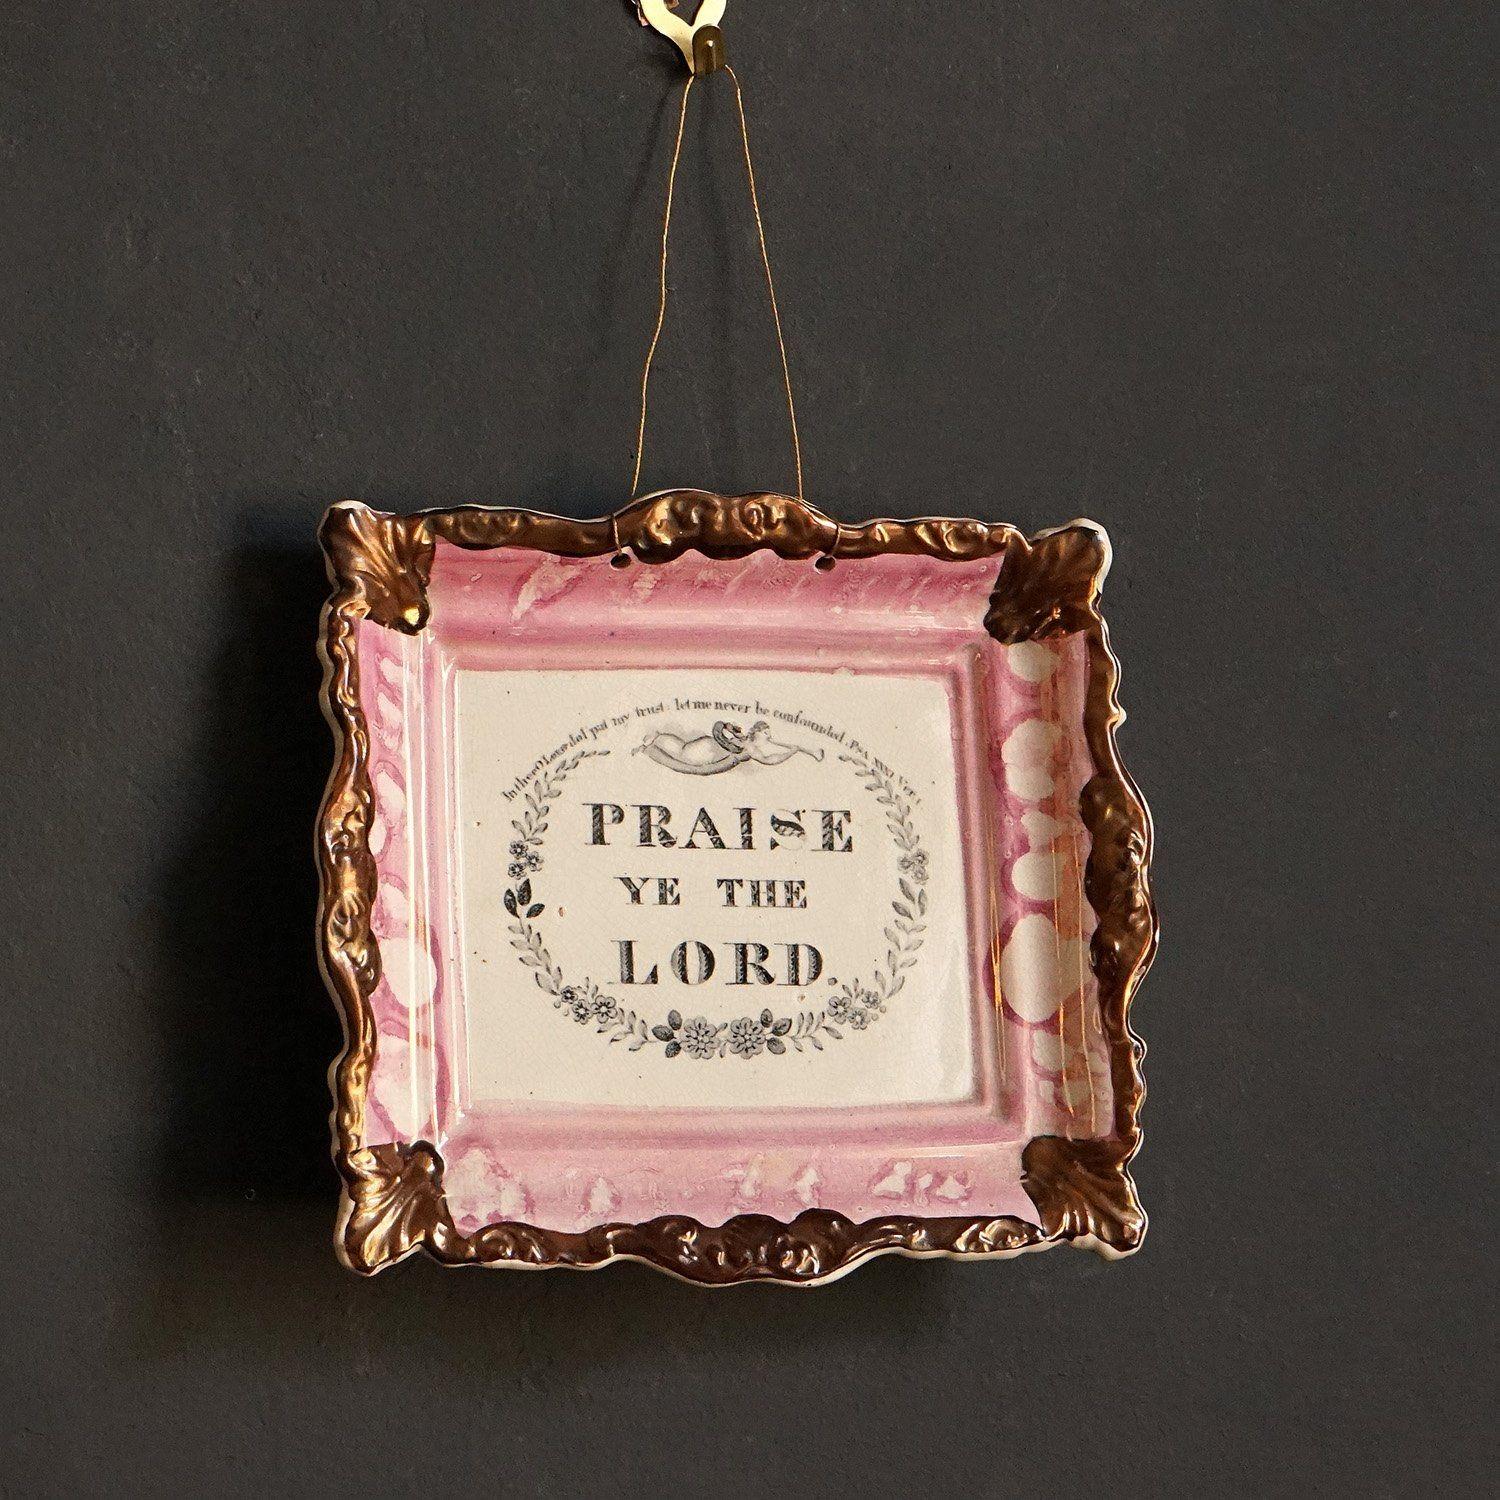 Ceramic Pink Sunderland Lustre Praise Ye The Lord Pottery Plaque, Mid 19th Century